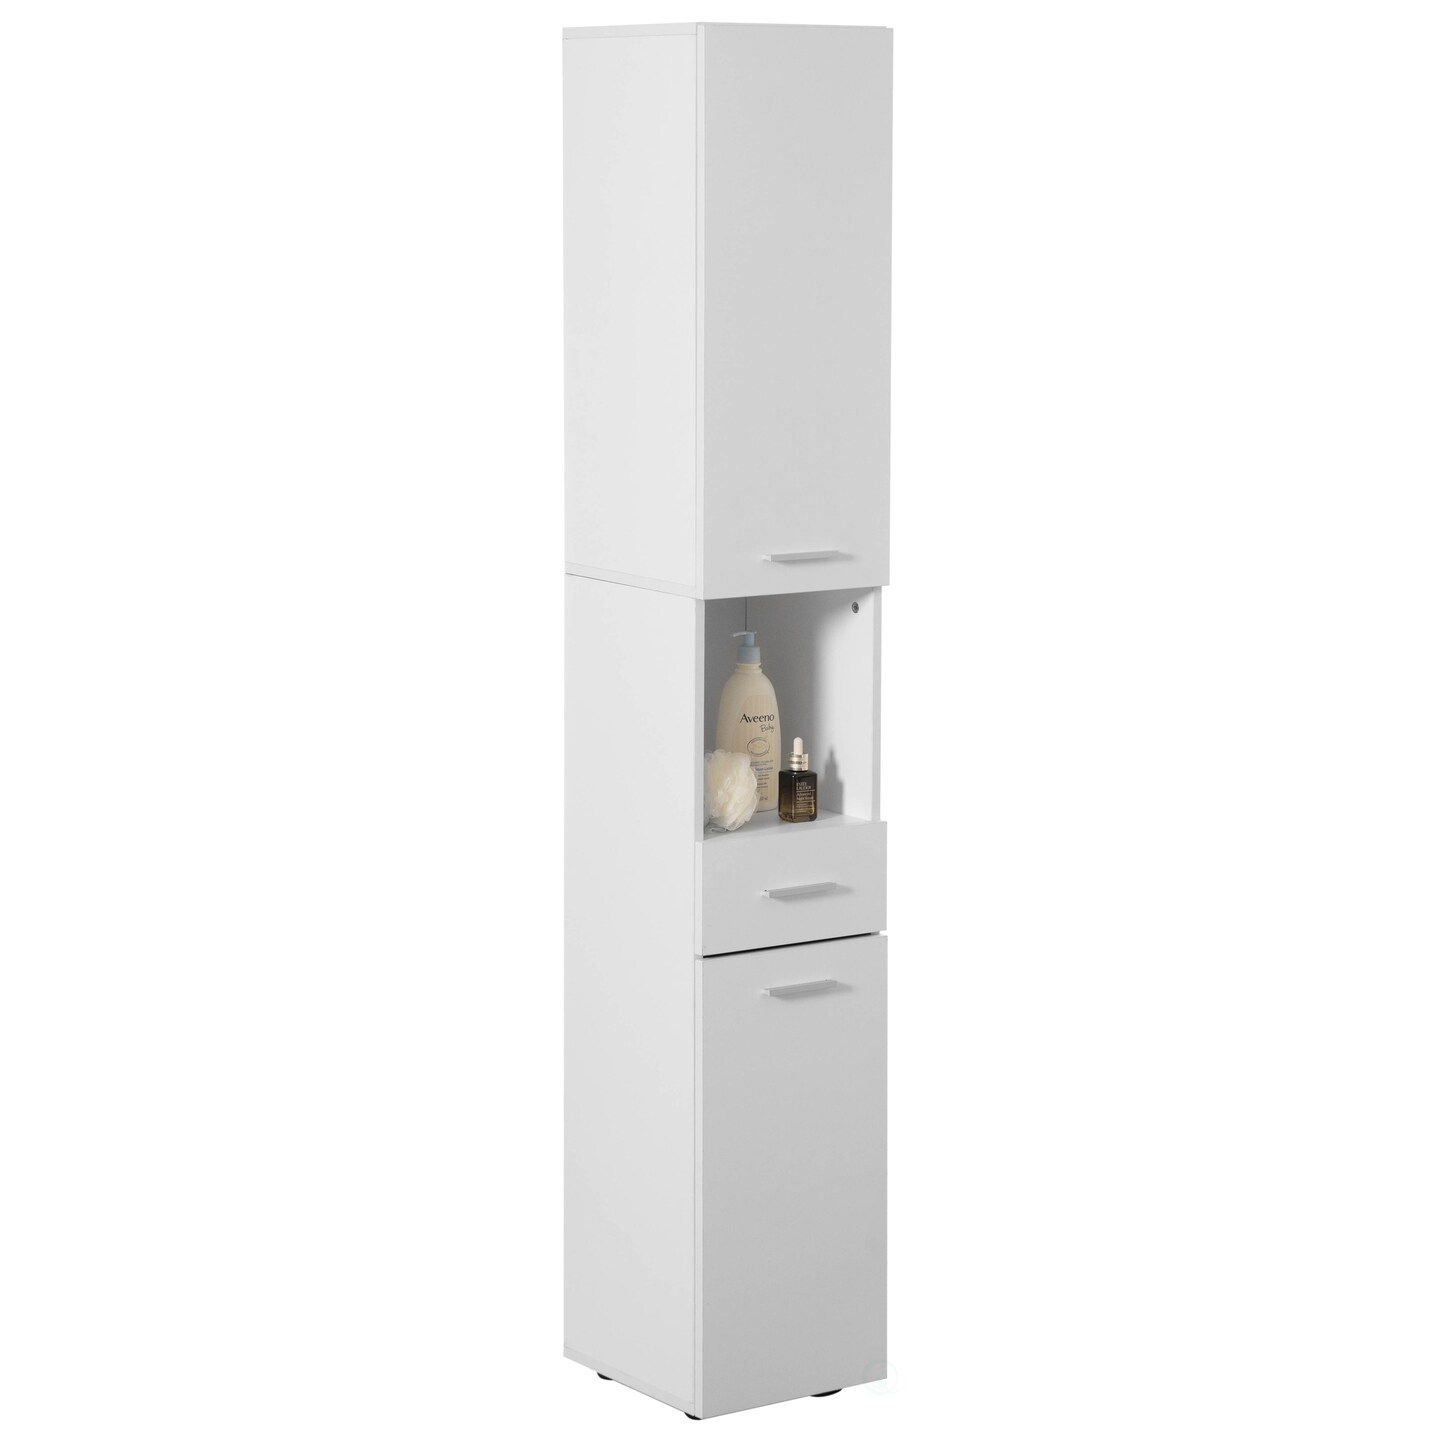 71.5 Inches Tall Thin Corner Shelf Floor Cabinet with 2 Doors, 1 Drawer, Freestanding Linen Tower Cabinet - Perfect for Bathroom, Living Room, Kitchen or Home Office, White